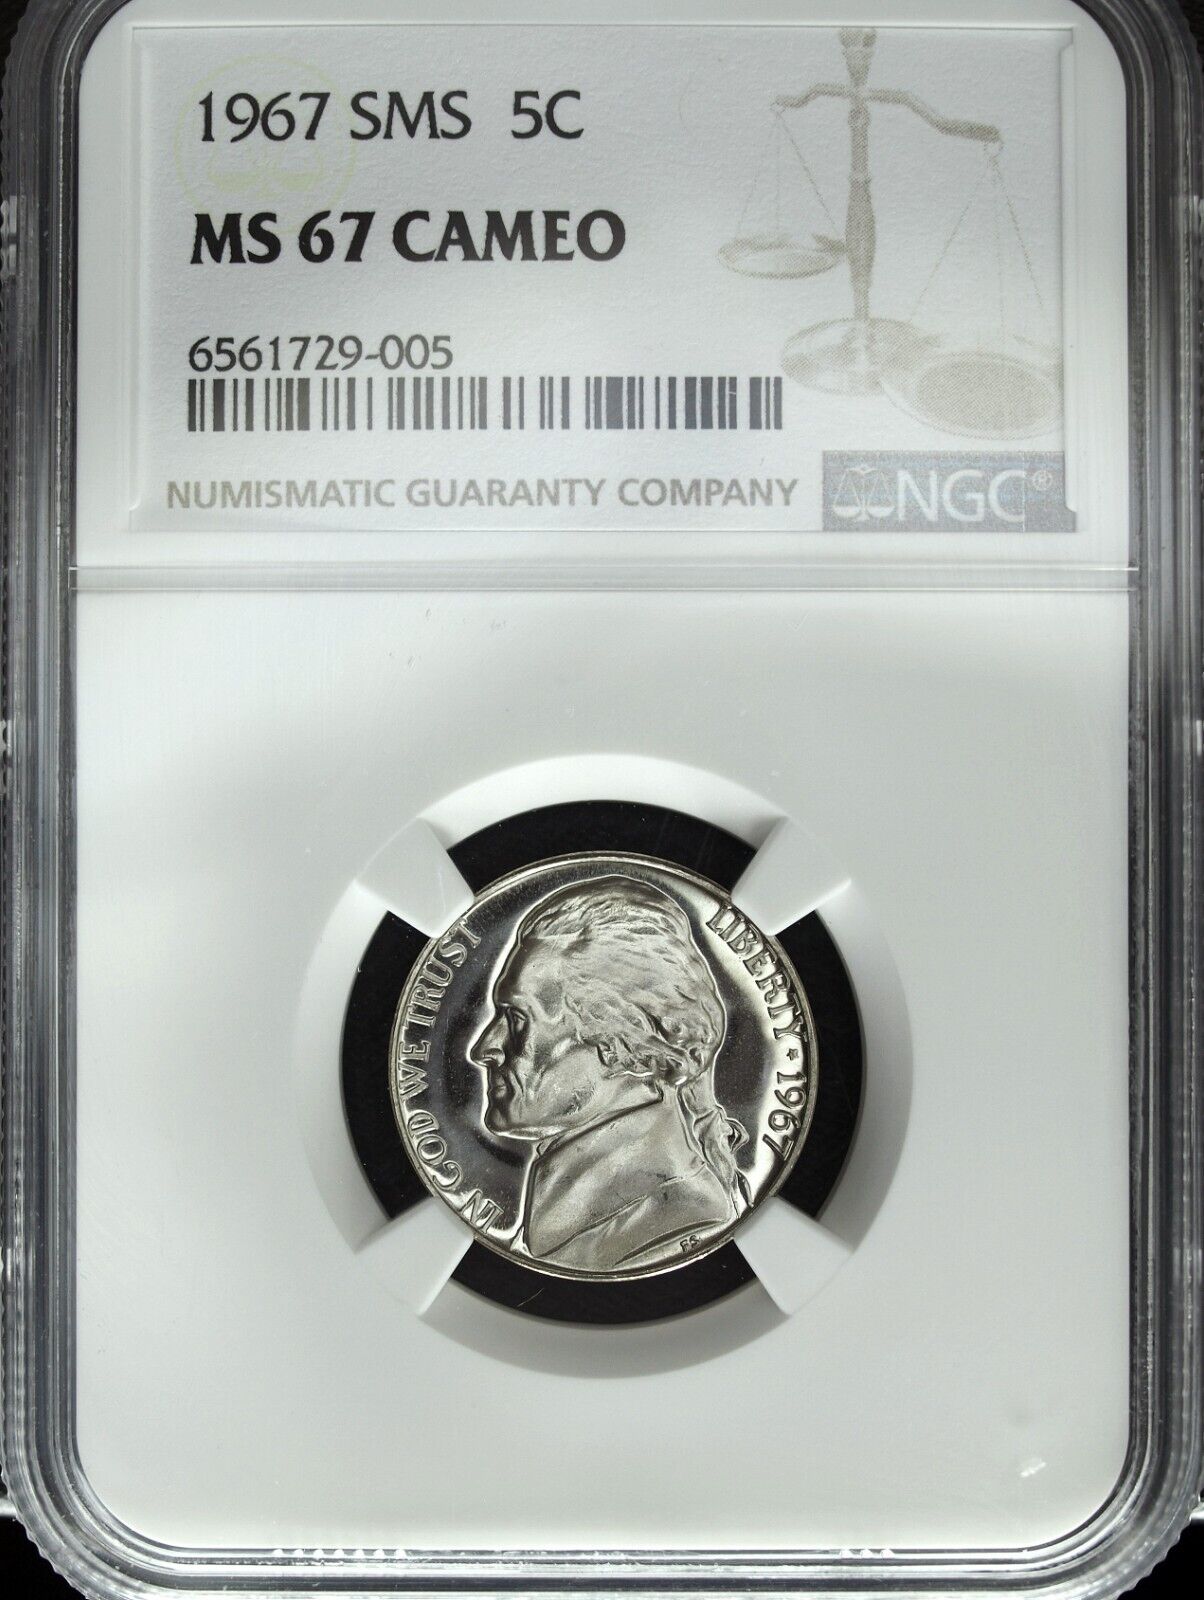 1967 SMS NGC MS 67 Cameo Jefferson Nickel ☆☆ Great For Sets ☆☆ 005